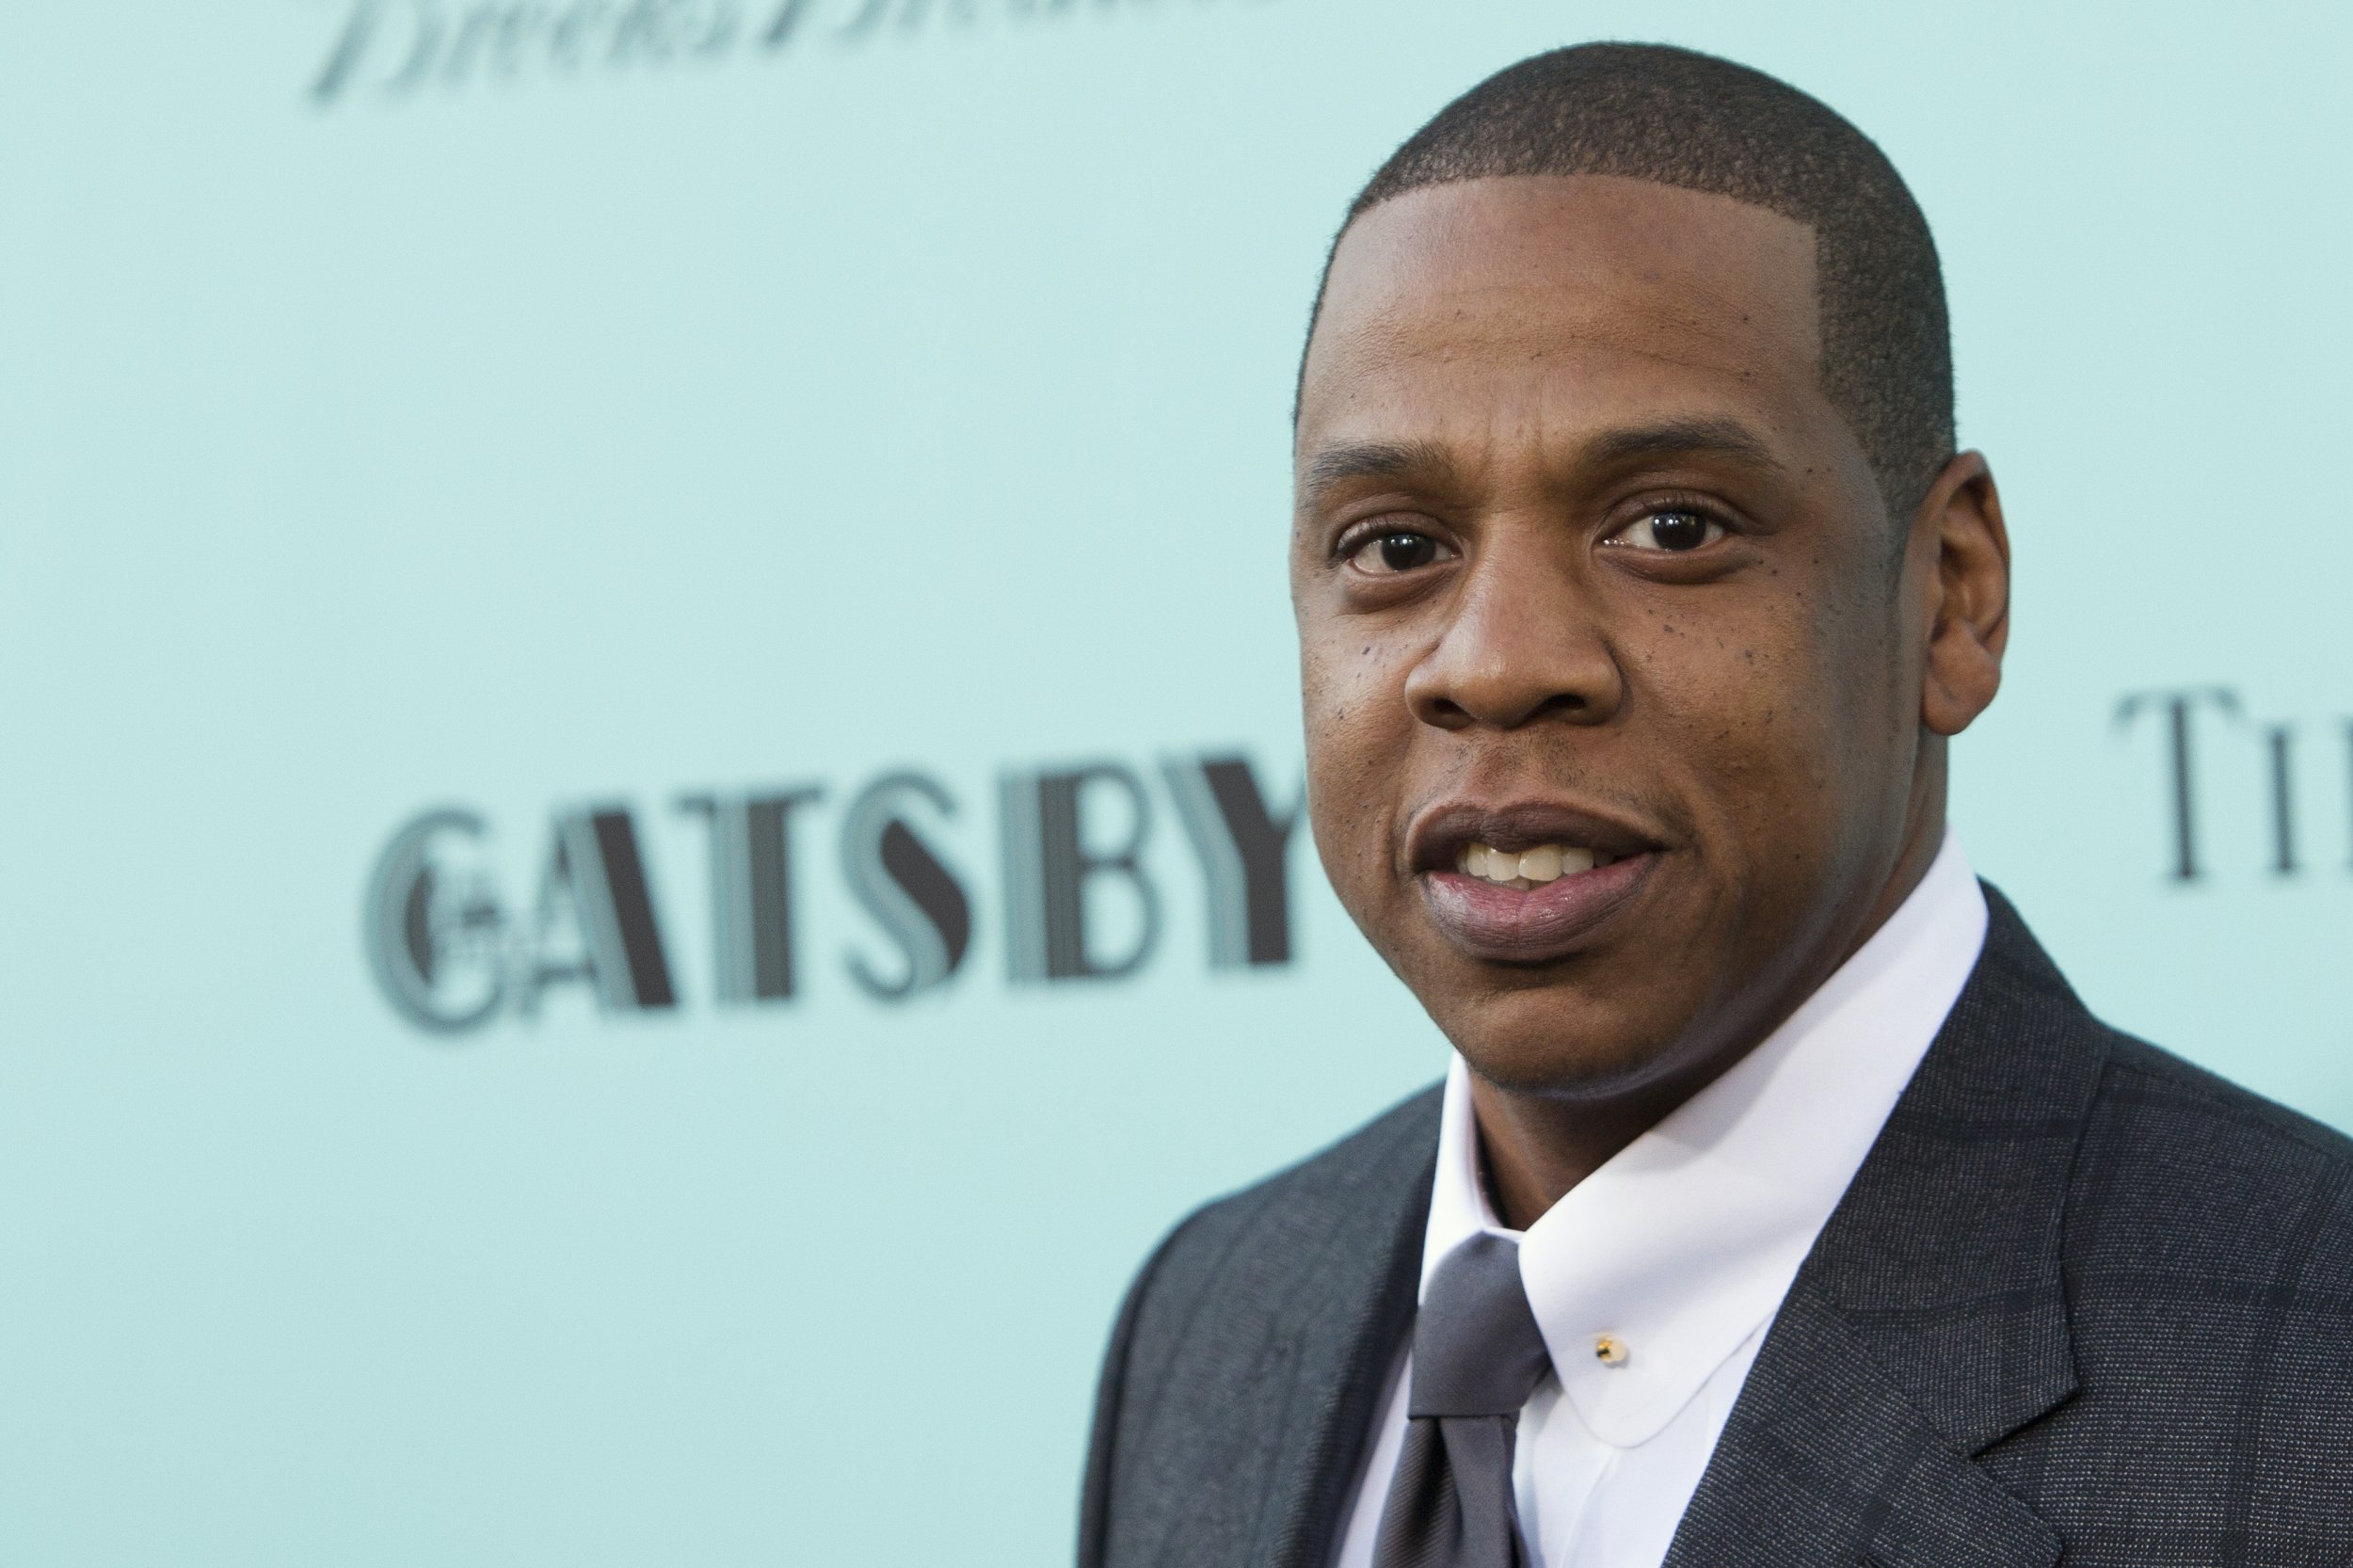 Jay-Z launches his very own cannabis line, Monogram